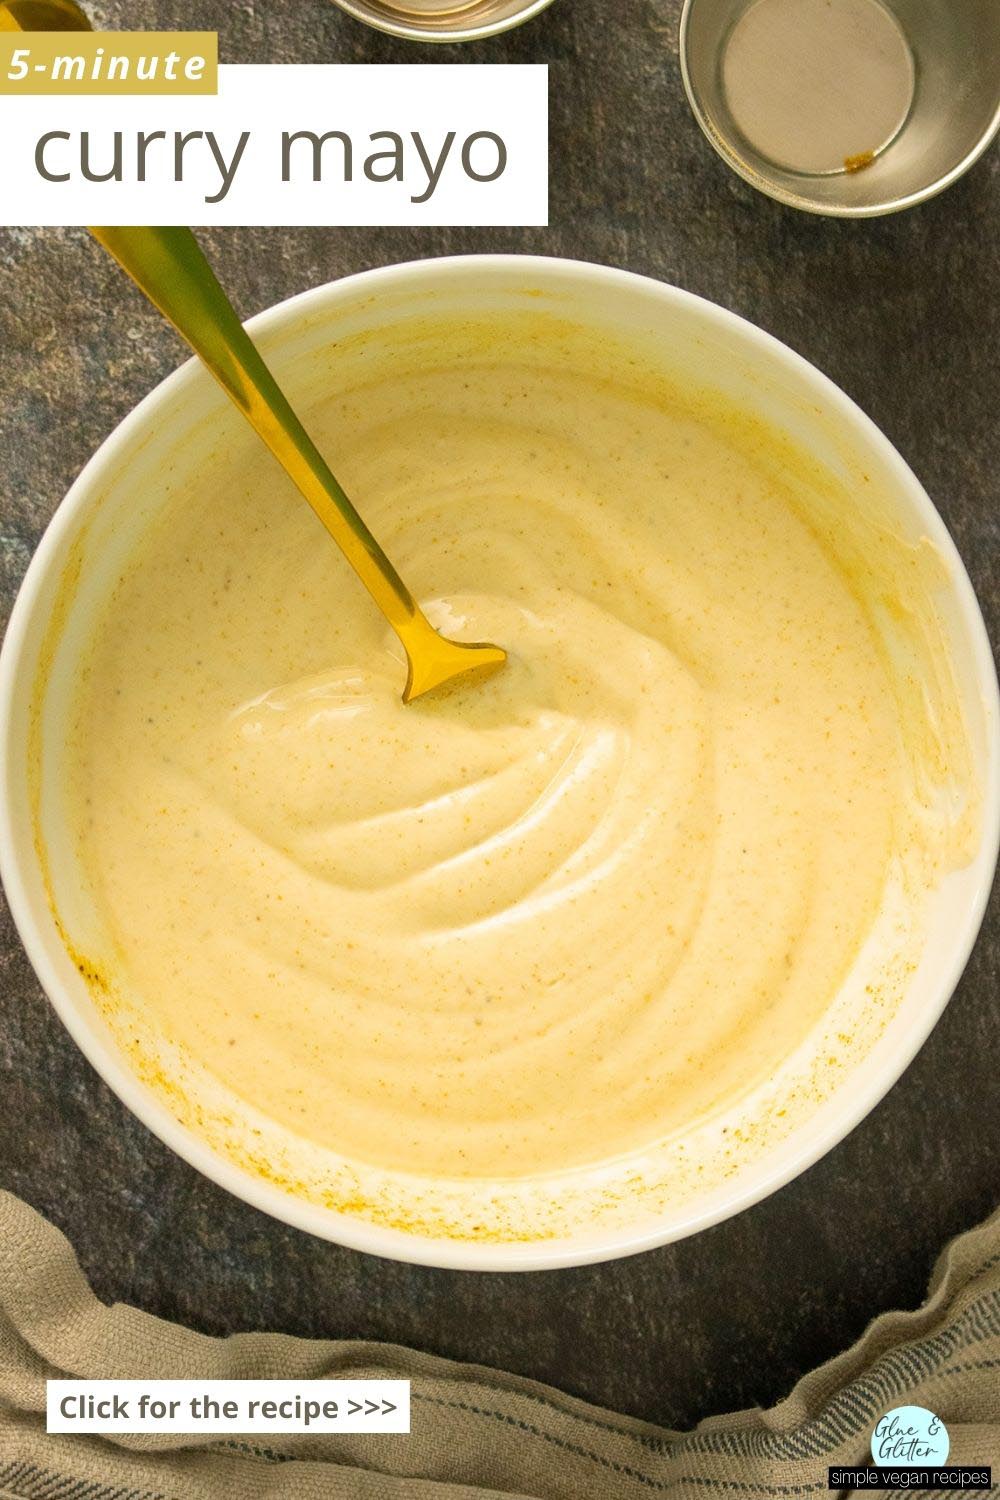 bowl of curry mayo with a text overlay